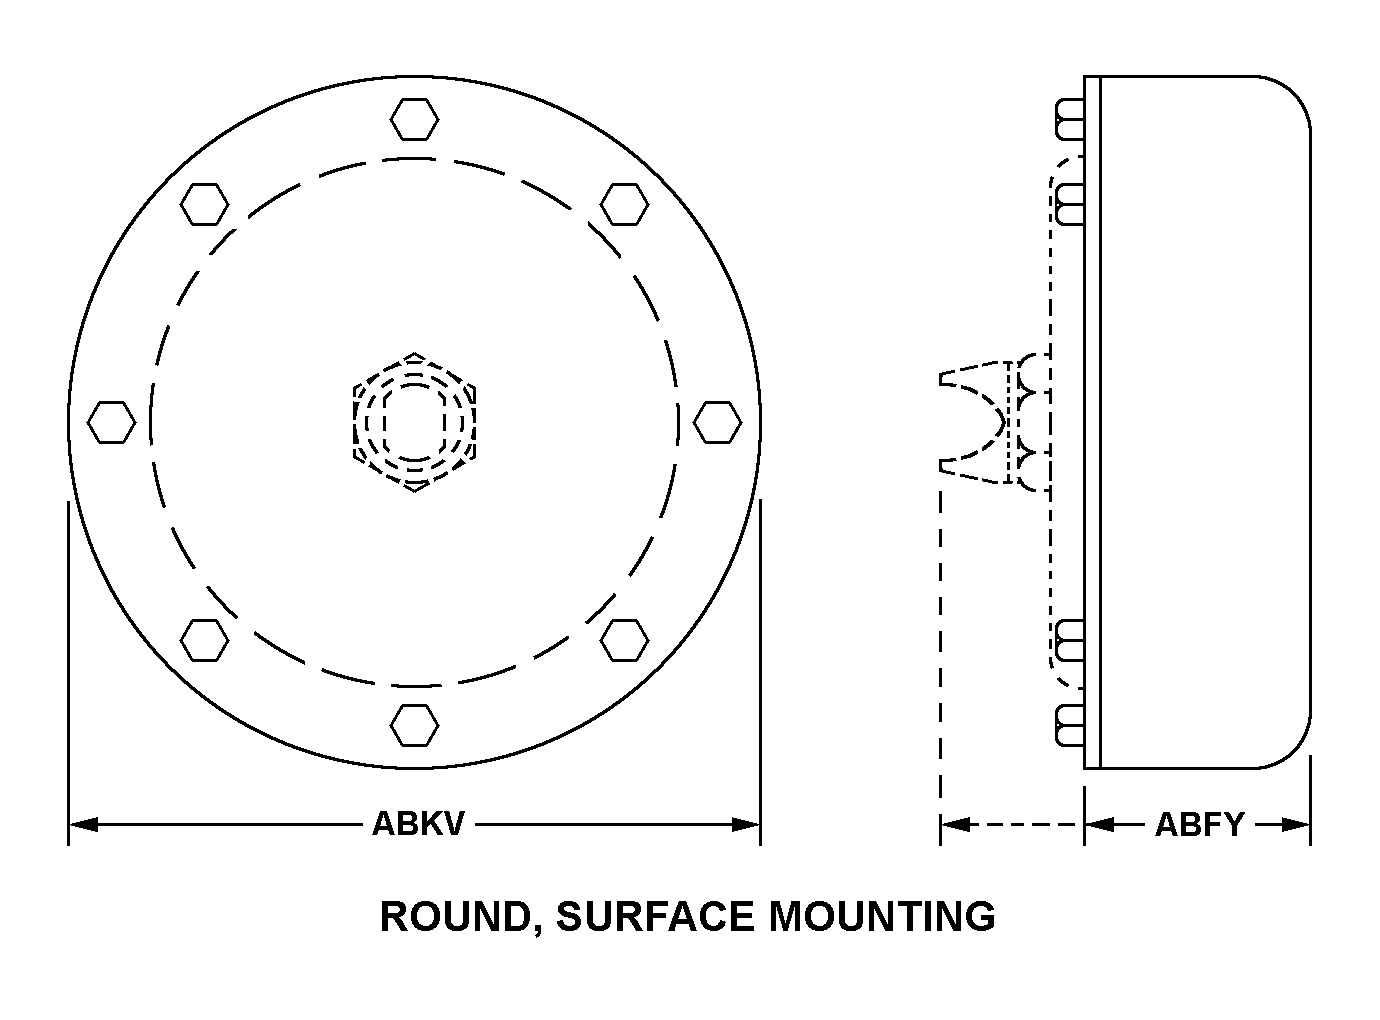 ROUND, SURFACE MOUNTING style nsn 5930-01-037-2857